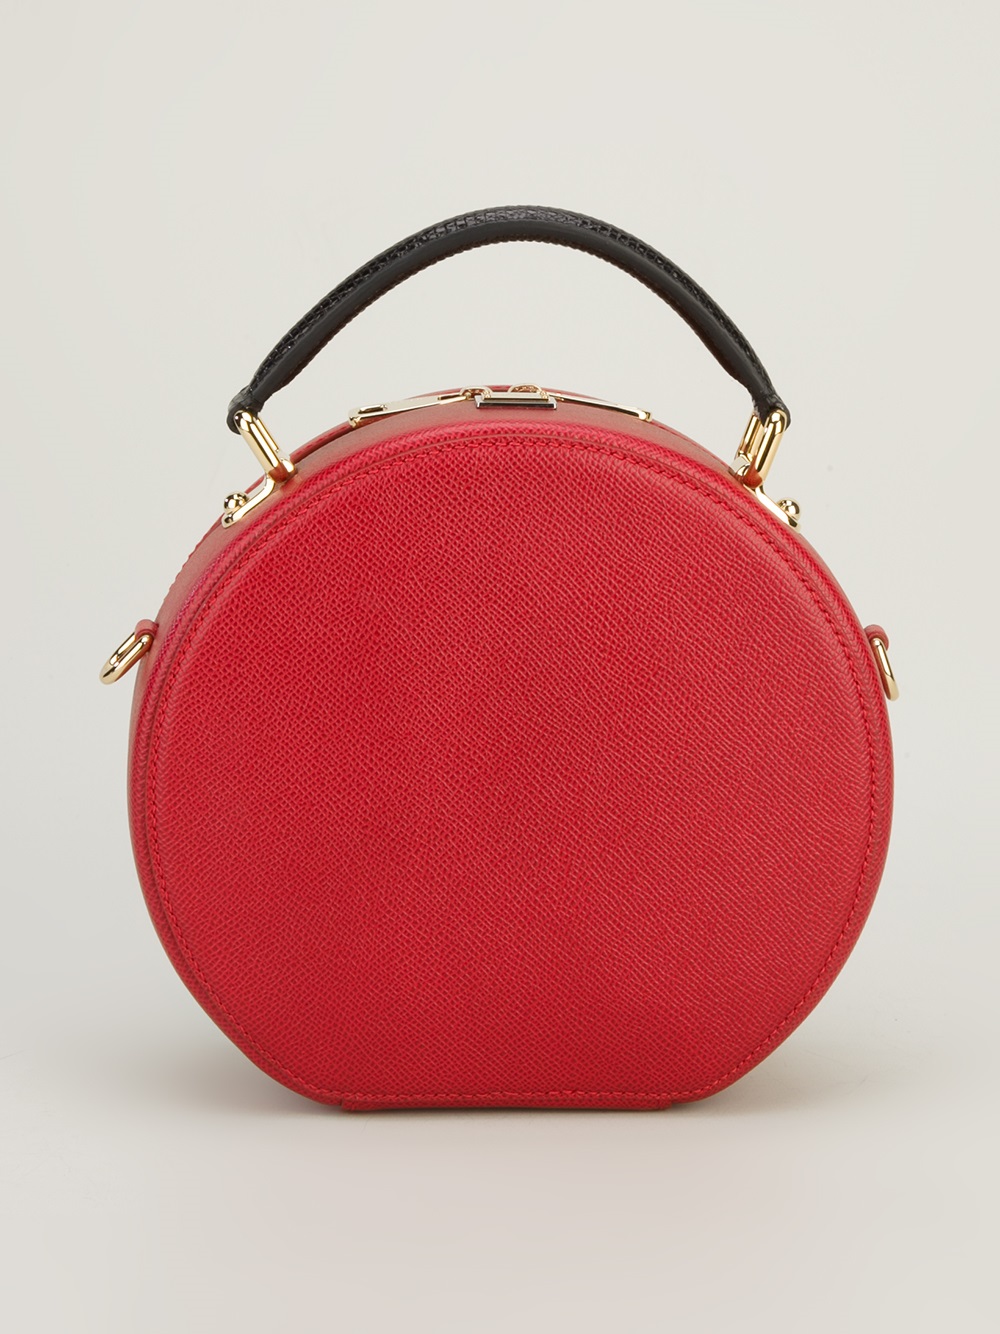 Dolce & Gabbana Small Round Shoulder Bag in Red - Lyst